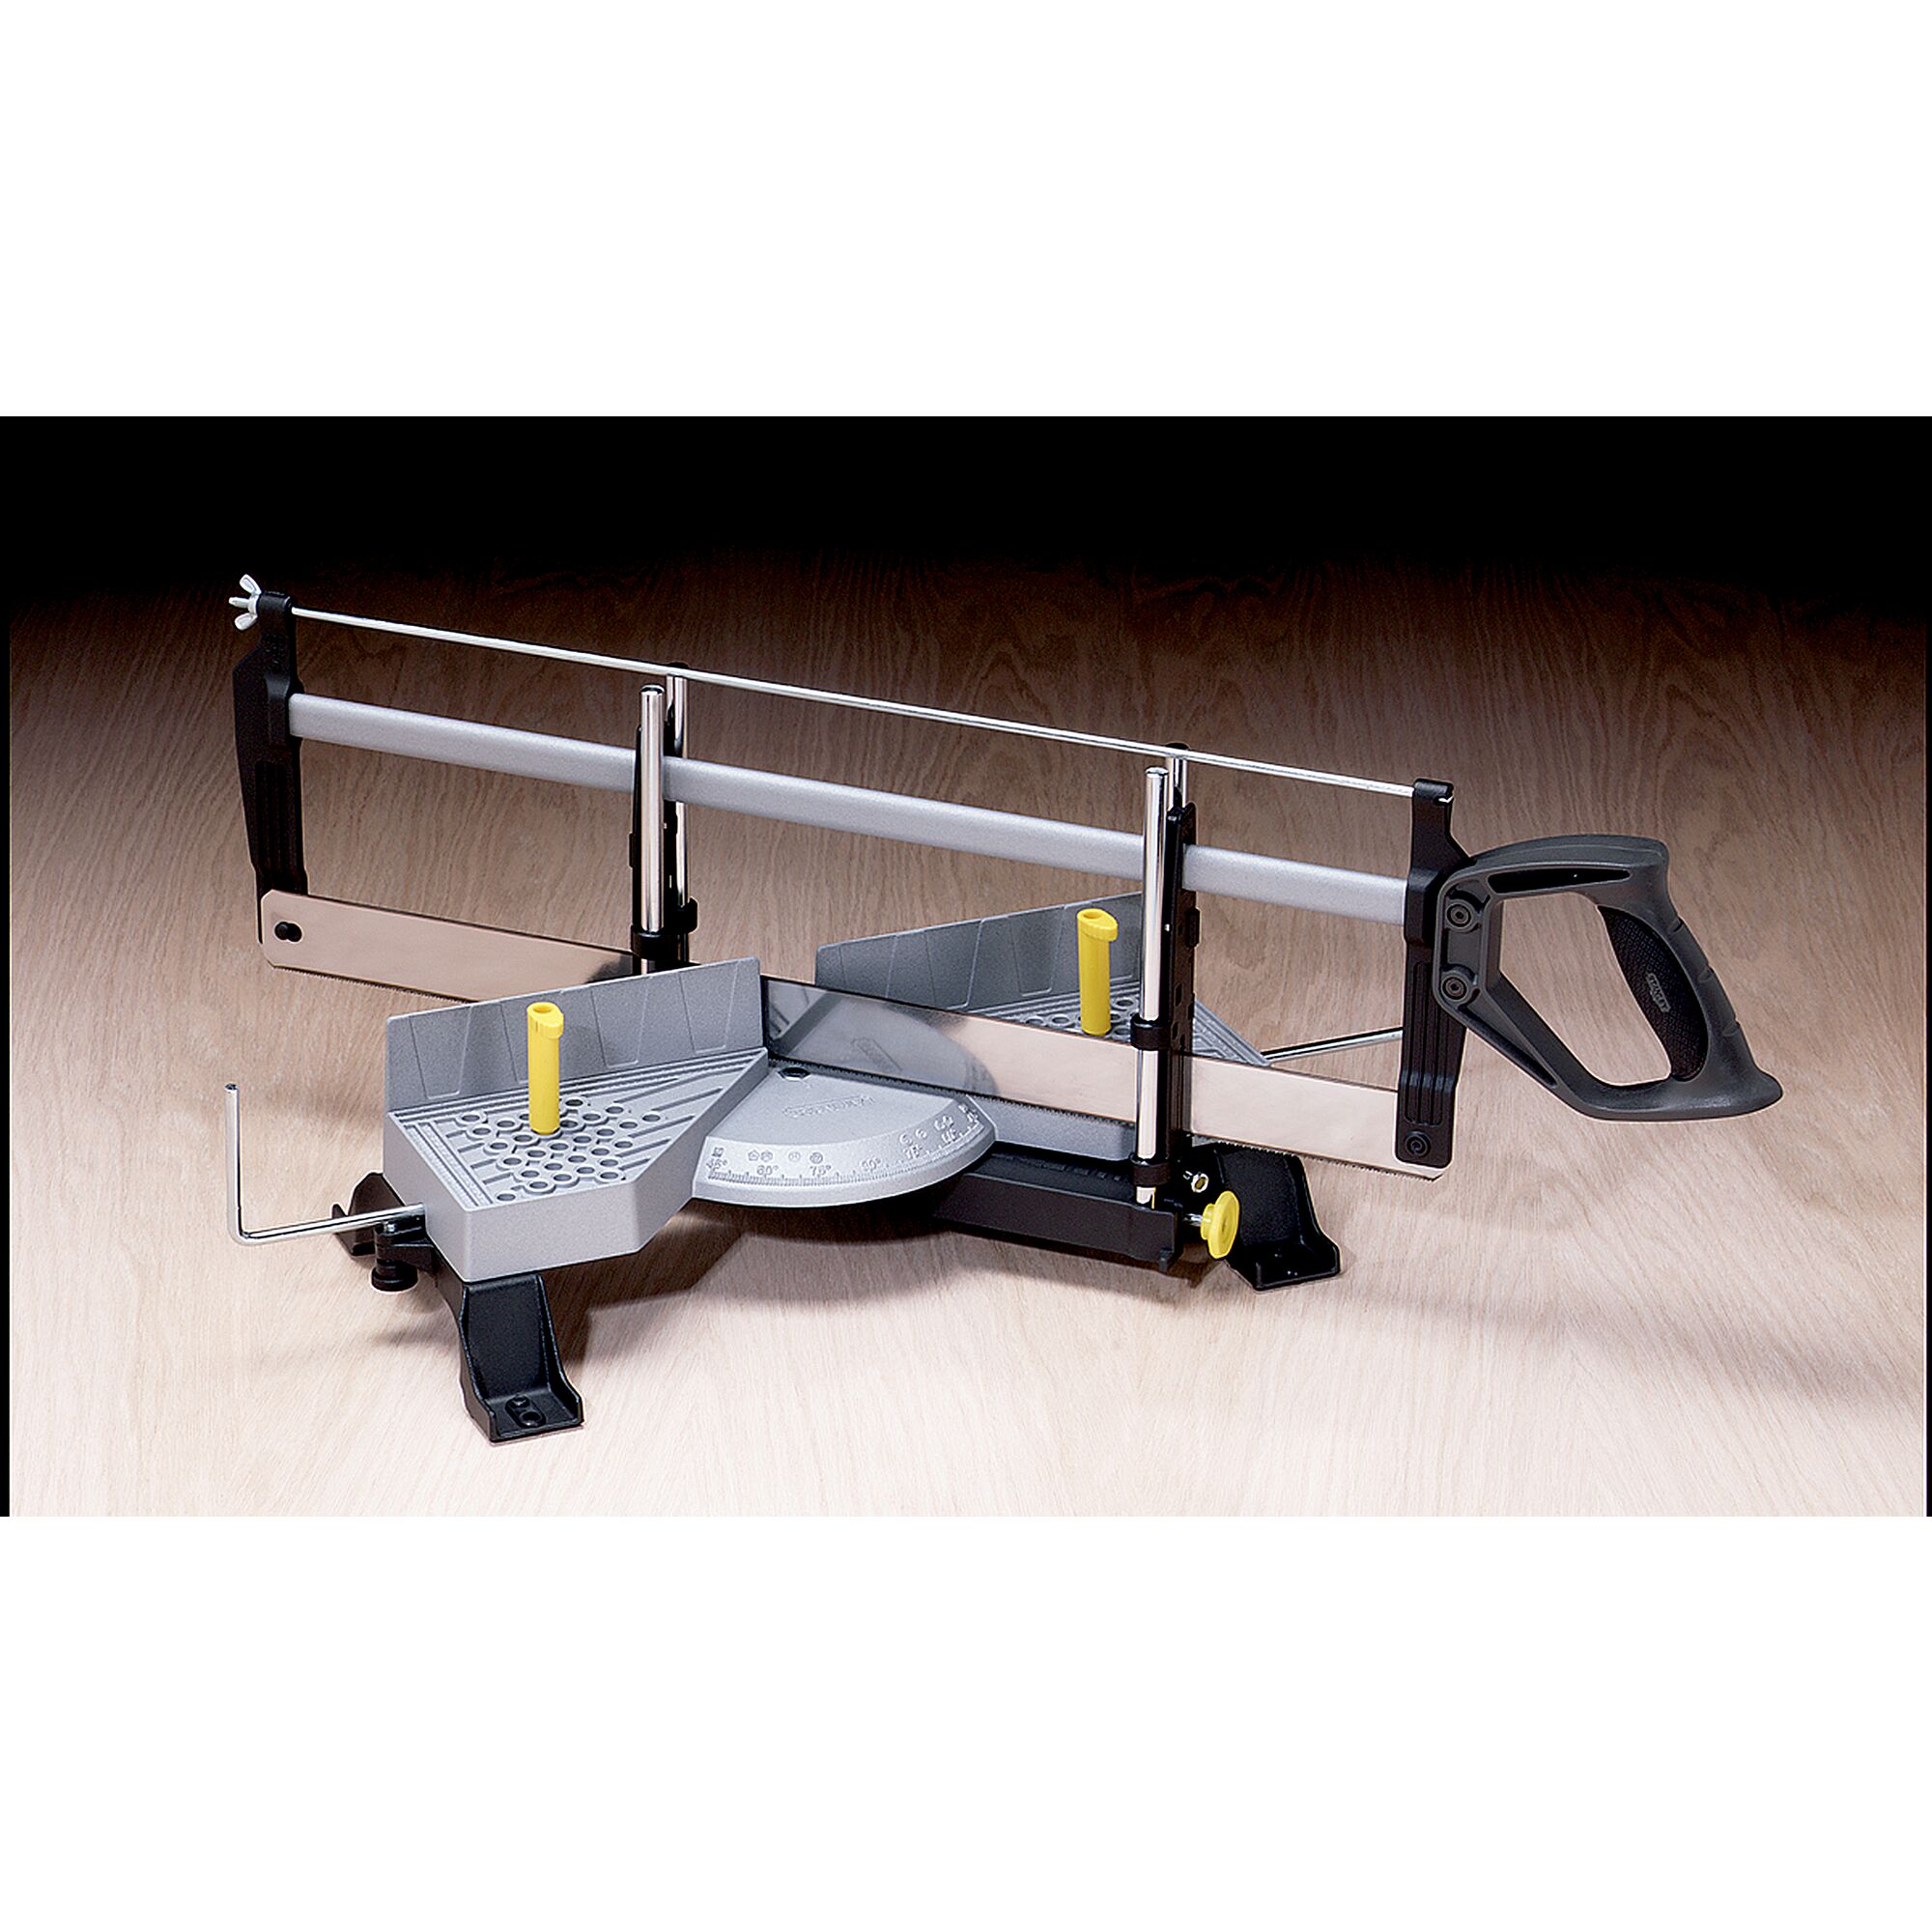 Details about   Miter Saw Box Mitre Saw Accessories Multi-function Clamping Mitre Saw Box With 